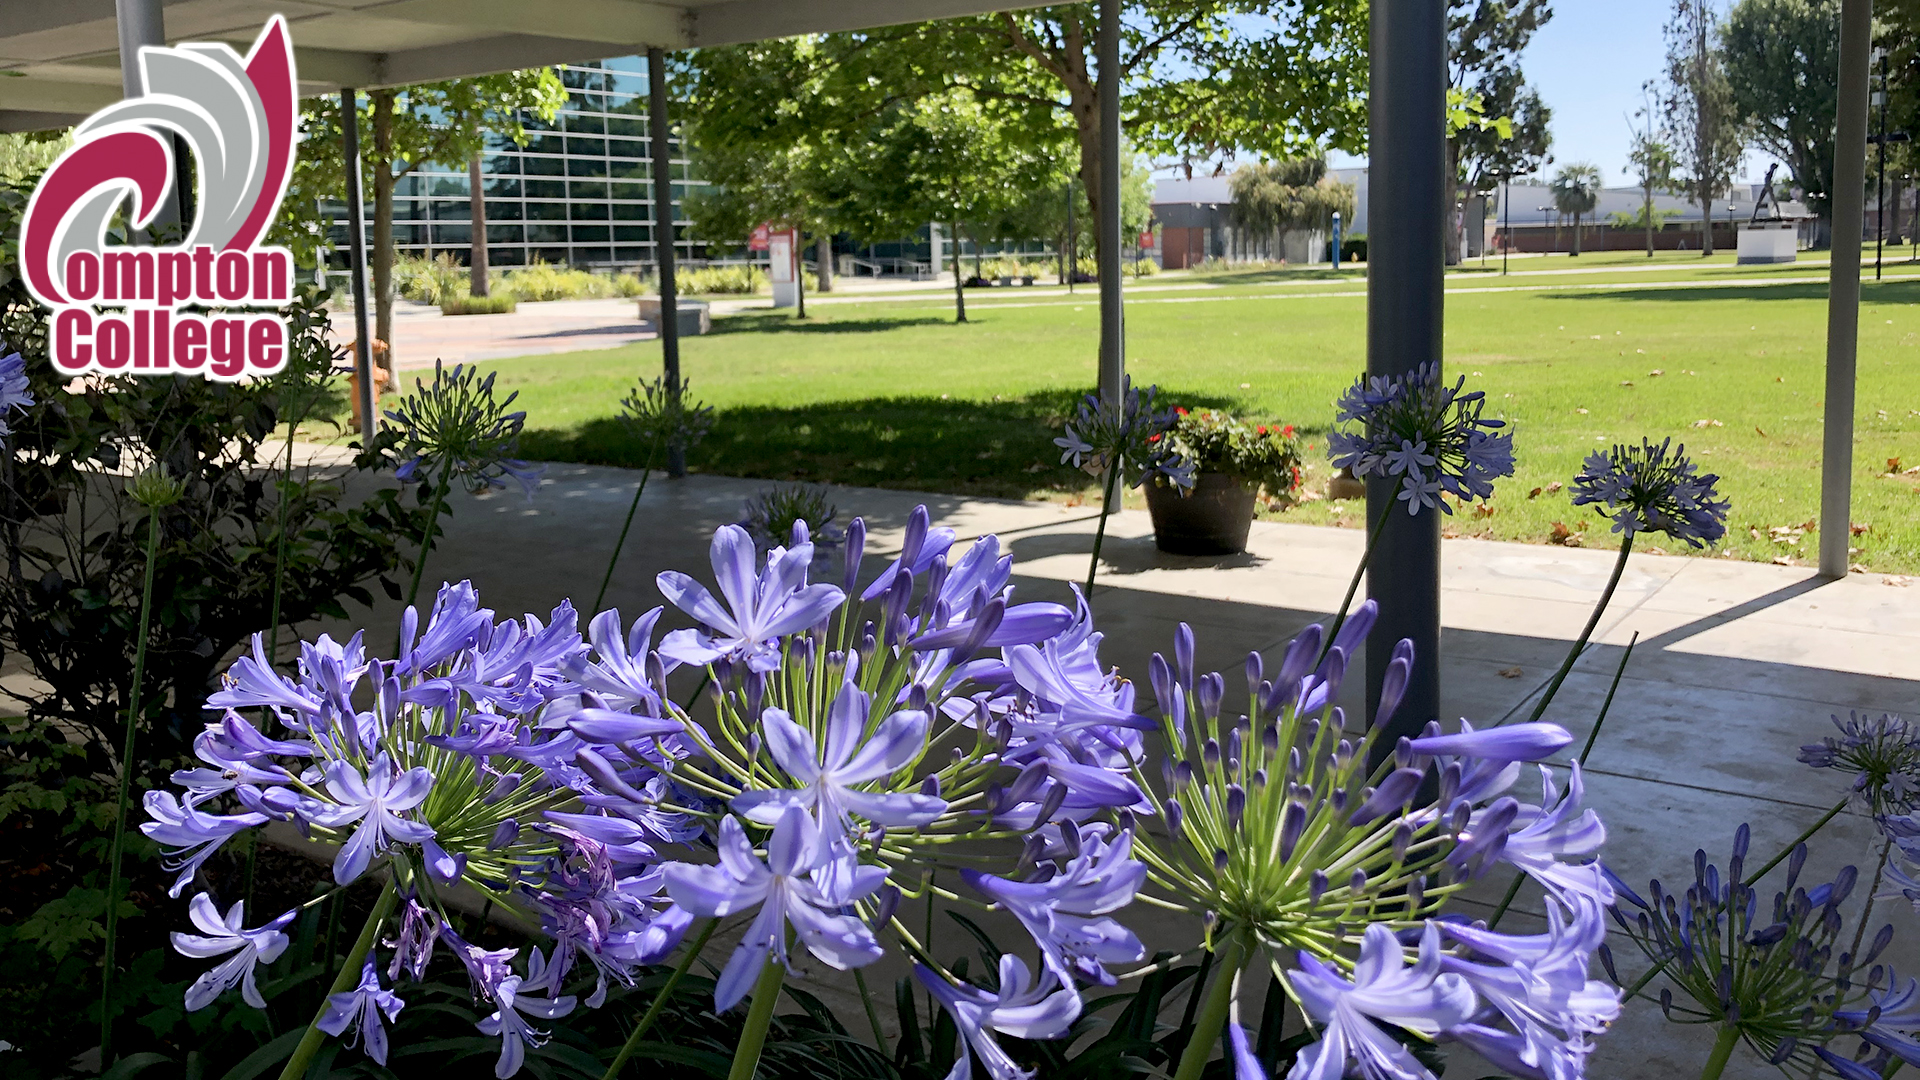 Compton College campus and agapanthas